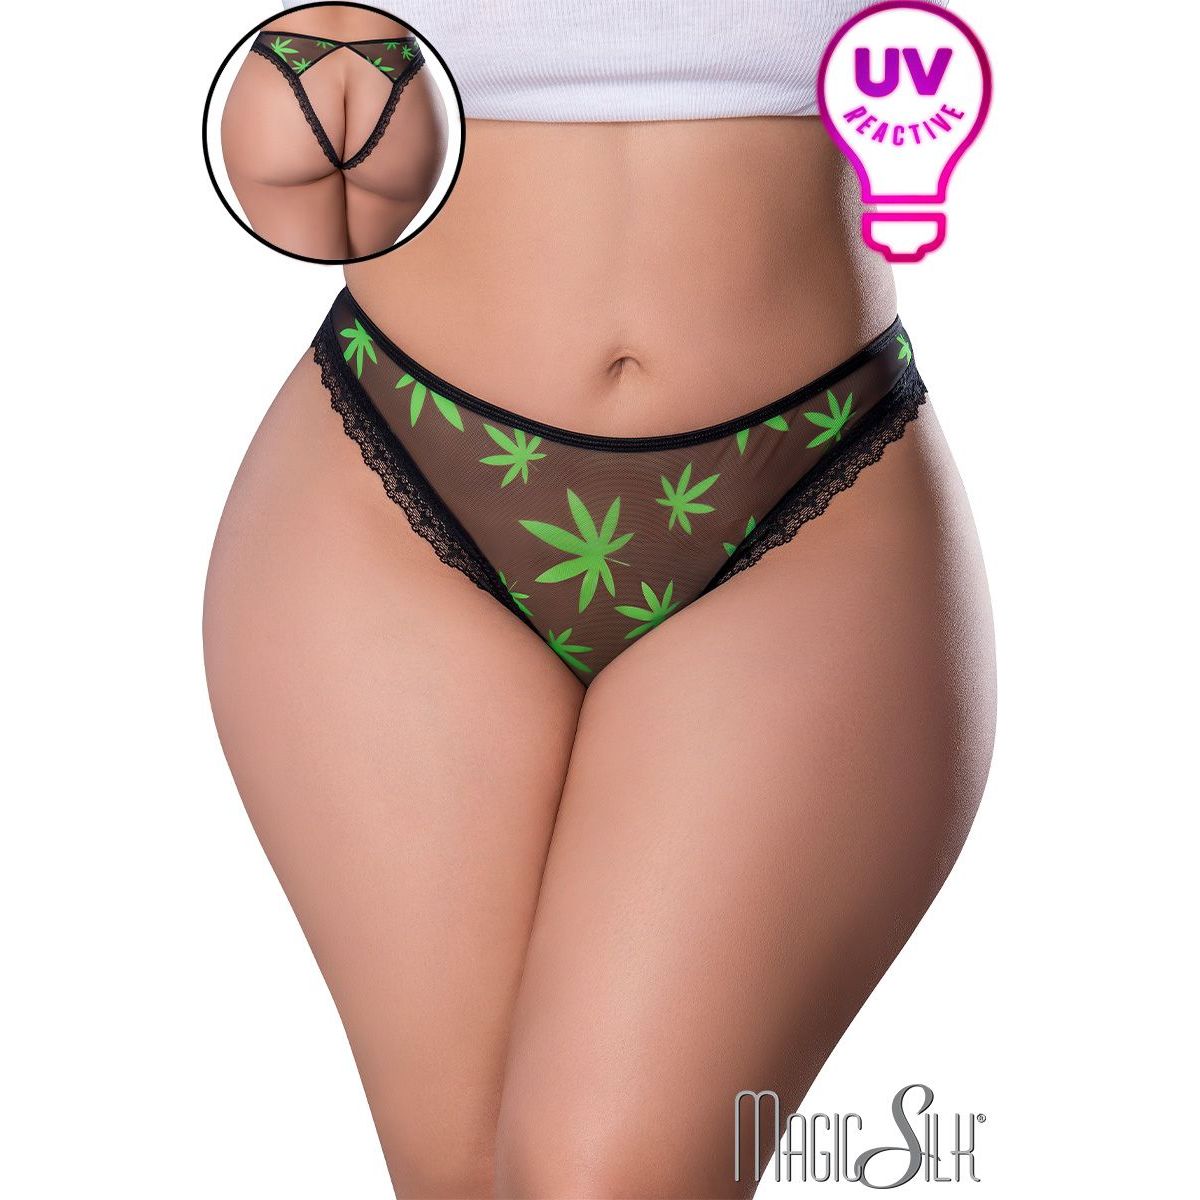 Exposed UV Leaf Open Bum Panty by Magic Silk